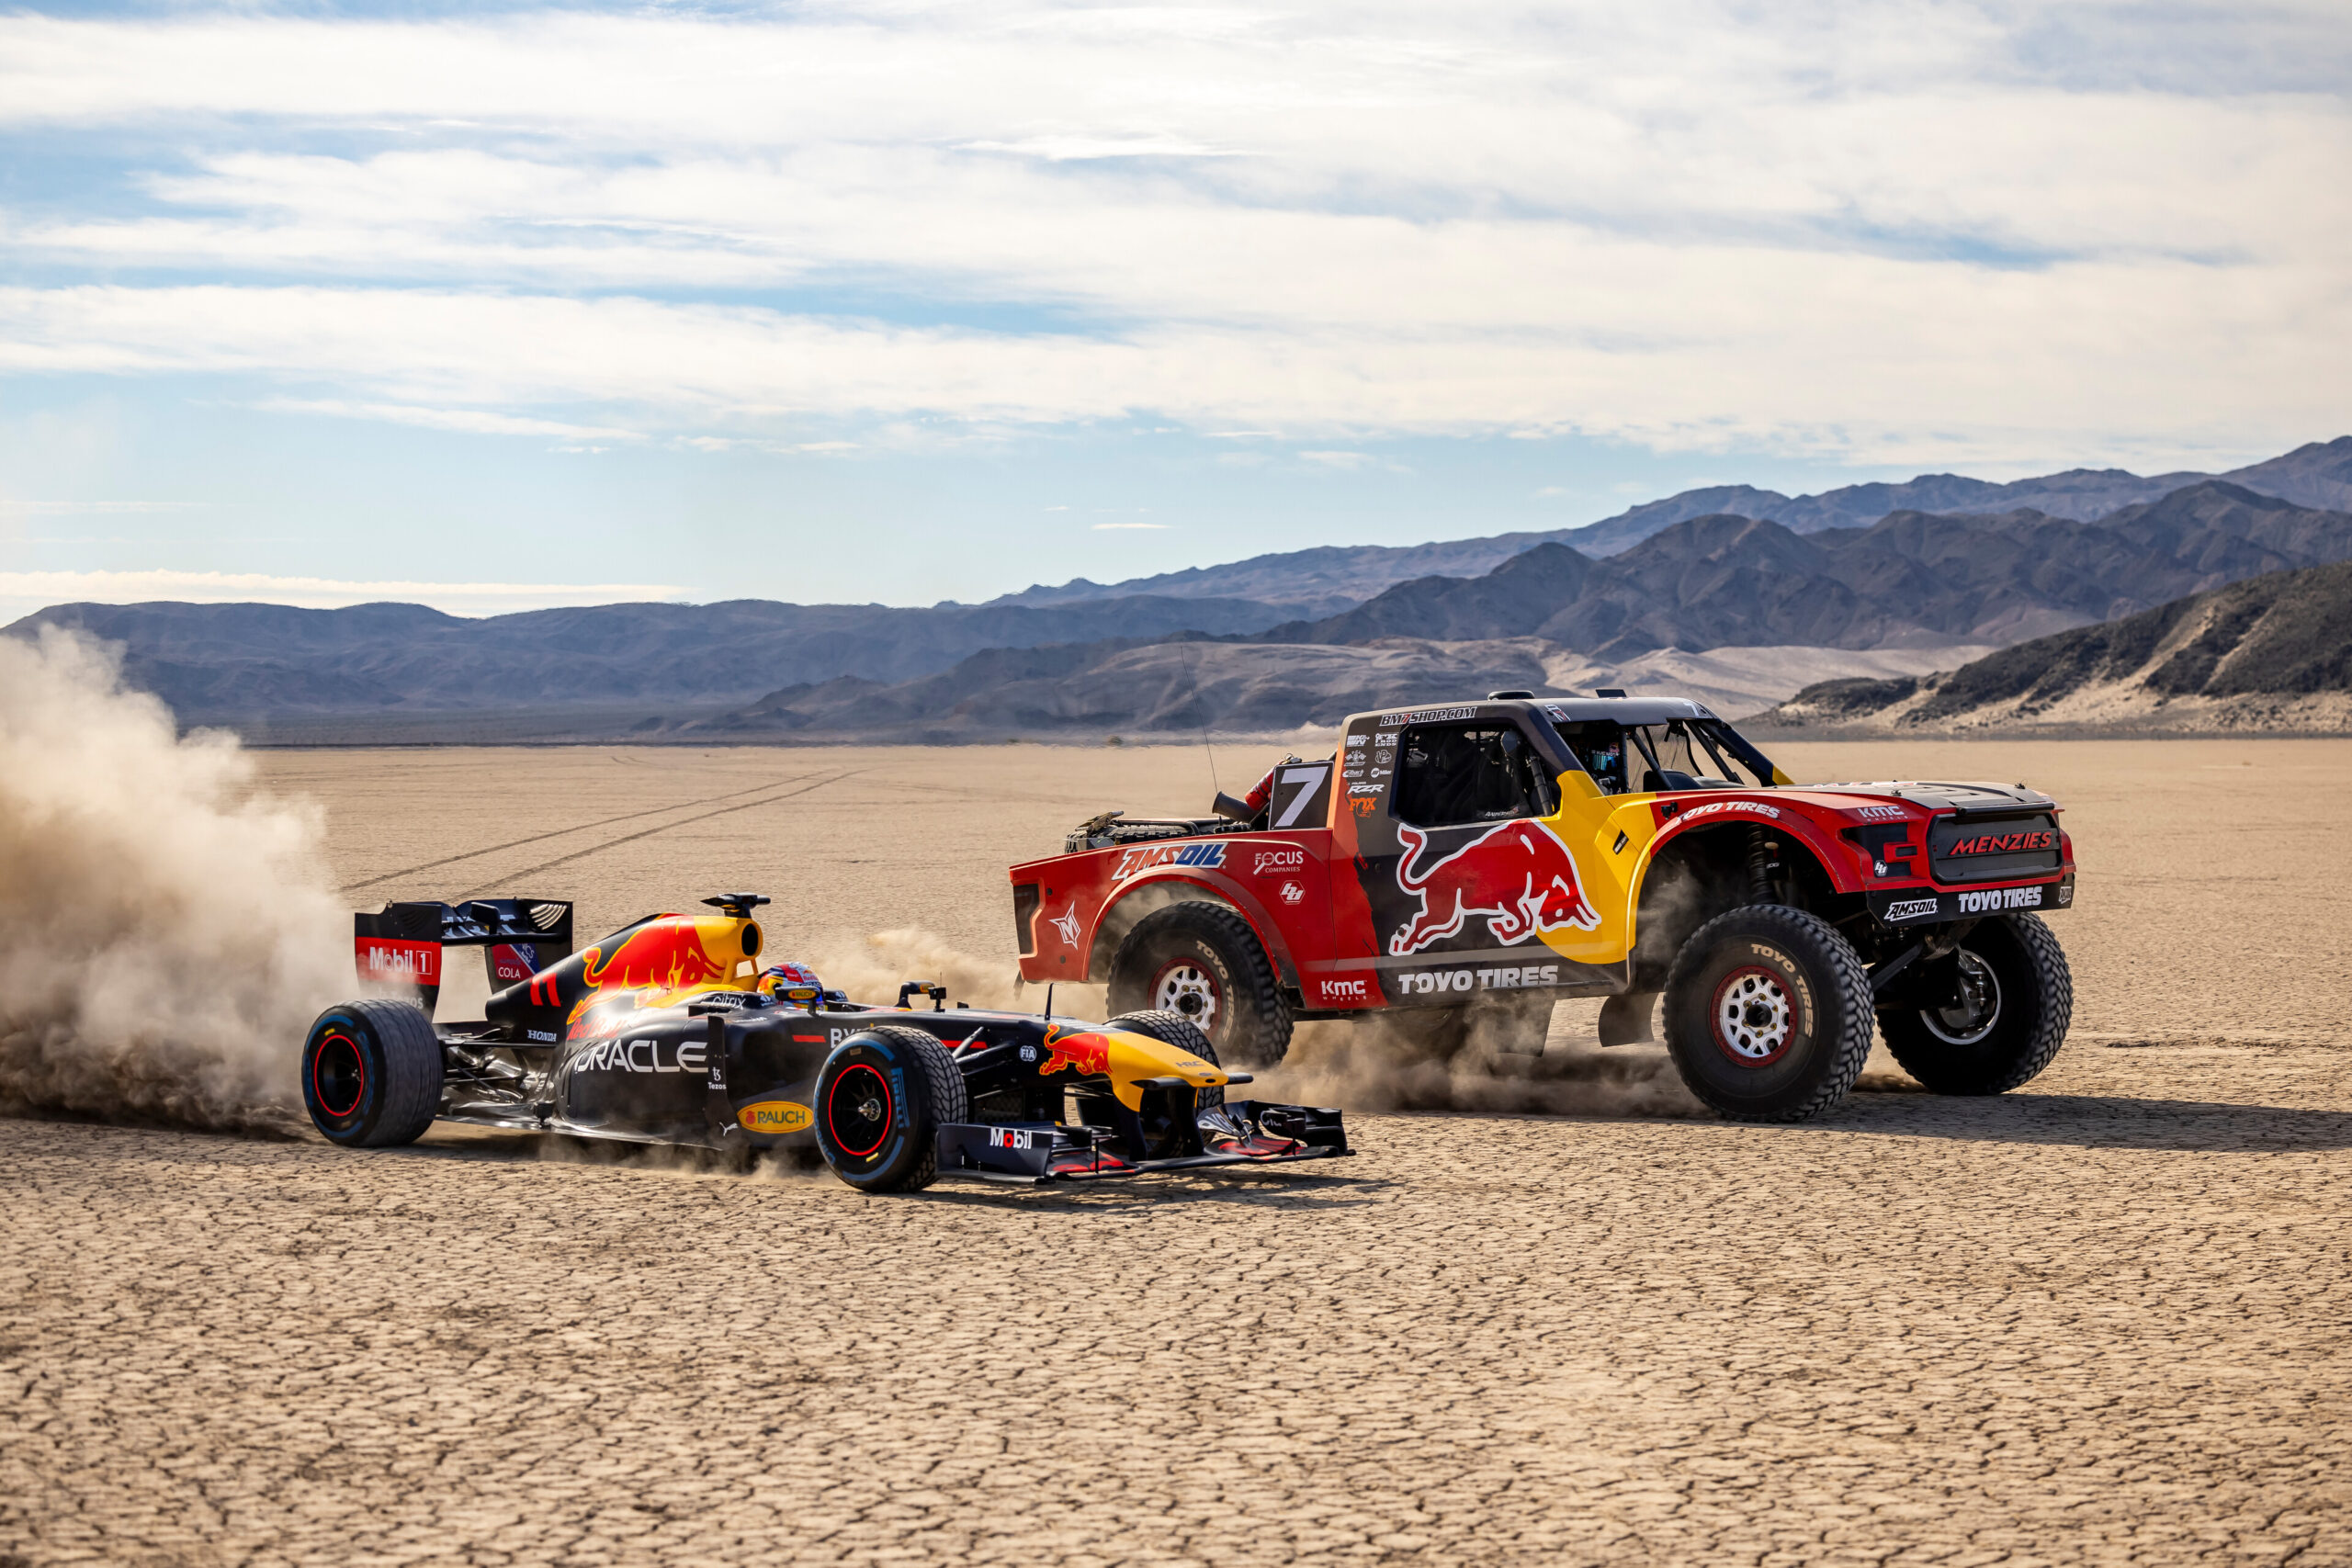 Menzies Shows Red Bull F1 A Good Time In ¡Vamos, Vegas!